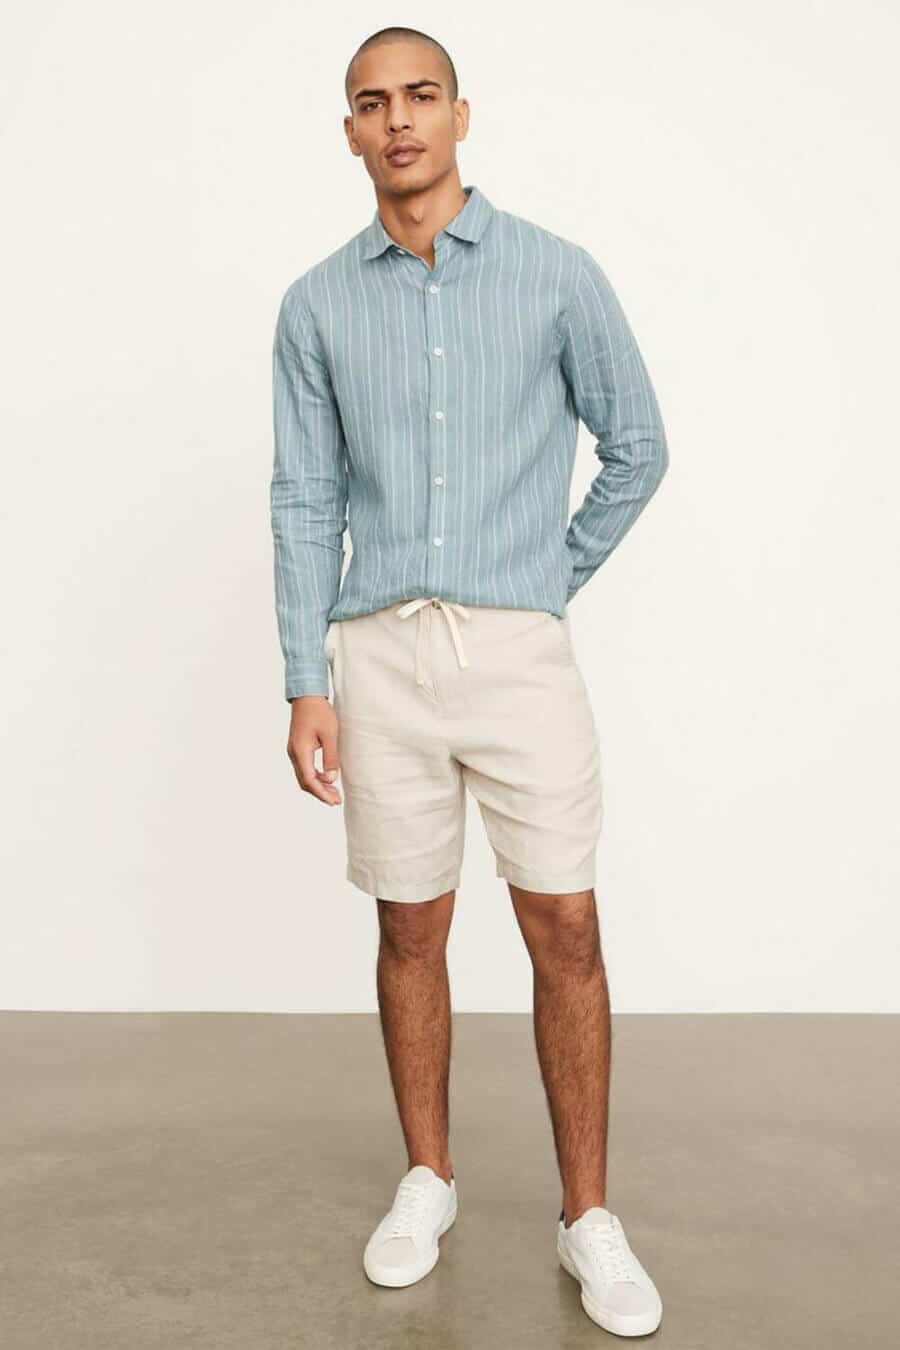 Men's smart casual summer outfit with linen shirt, tailored shorts and white sneakers